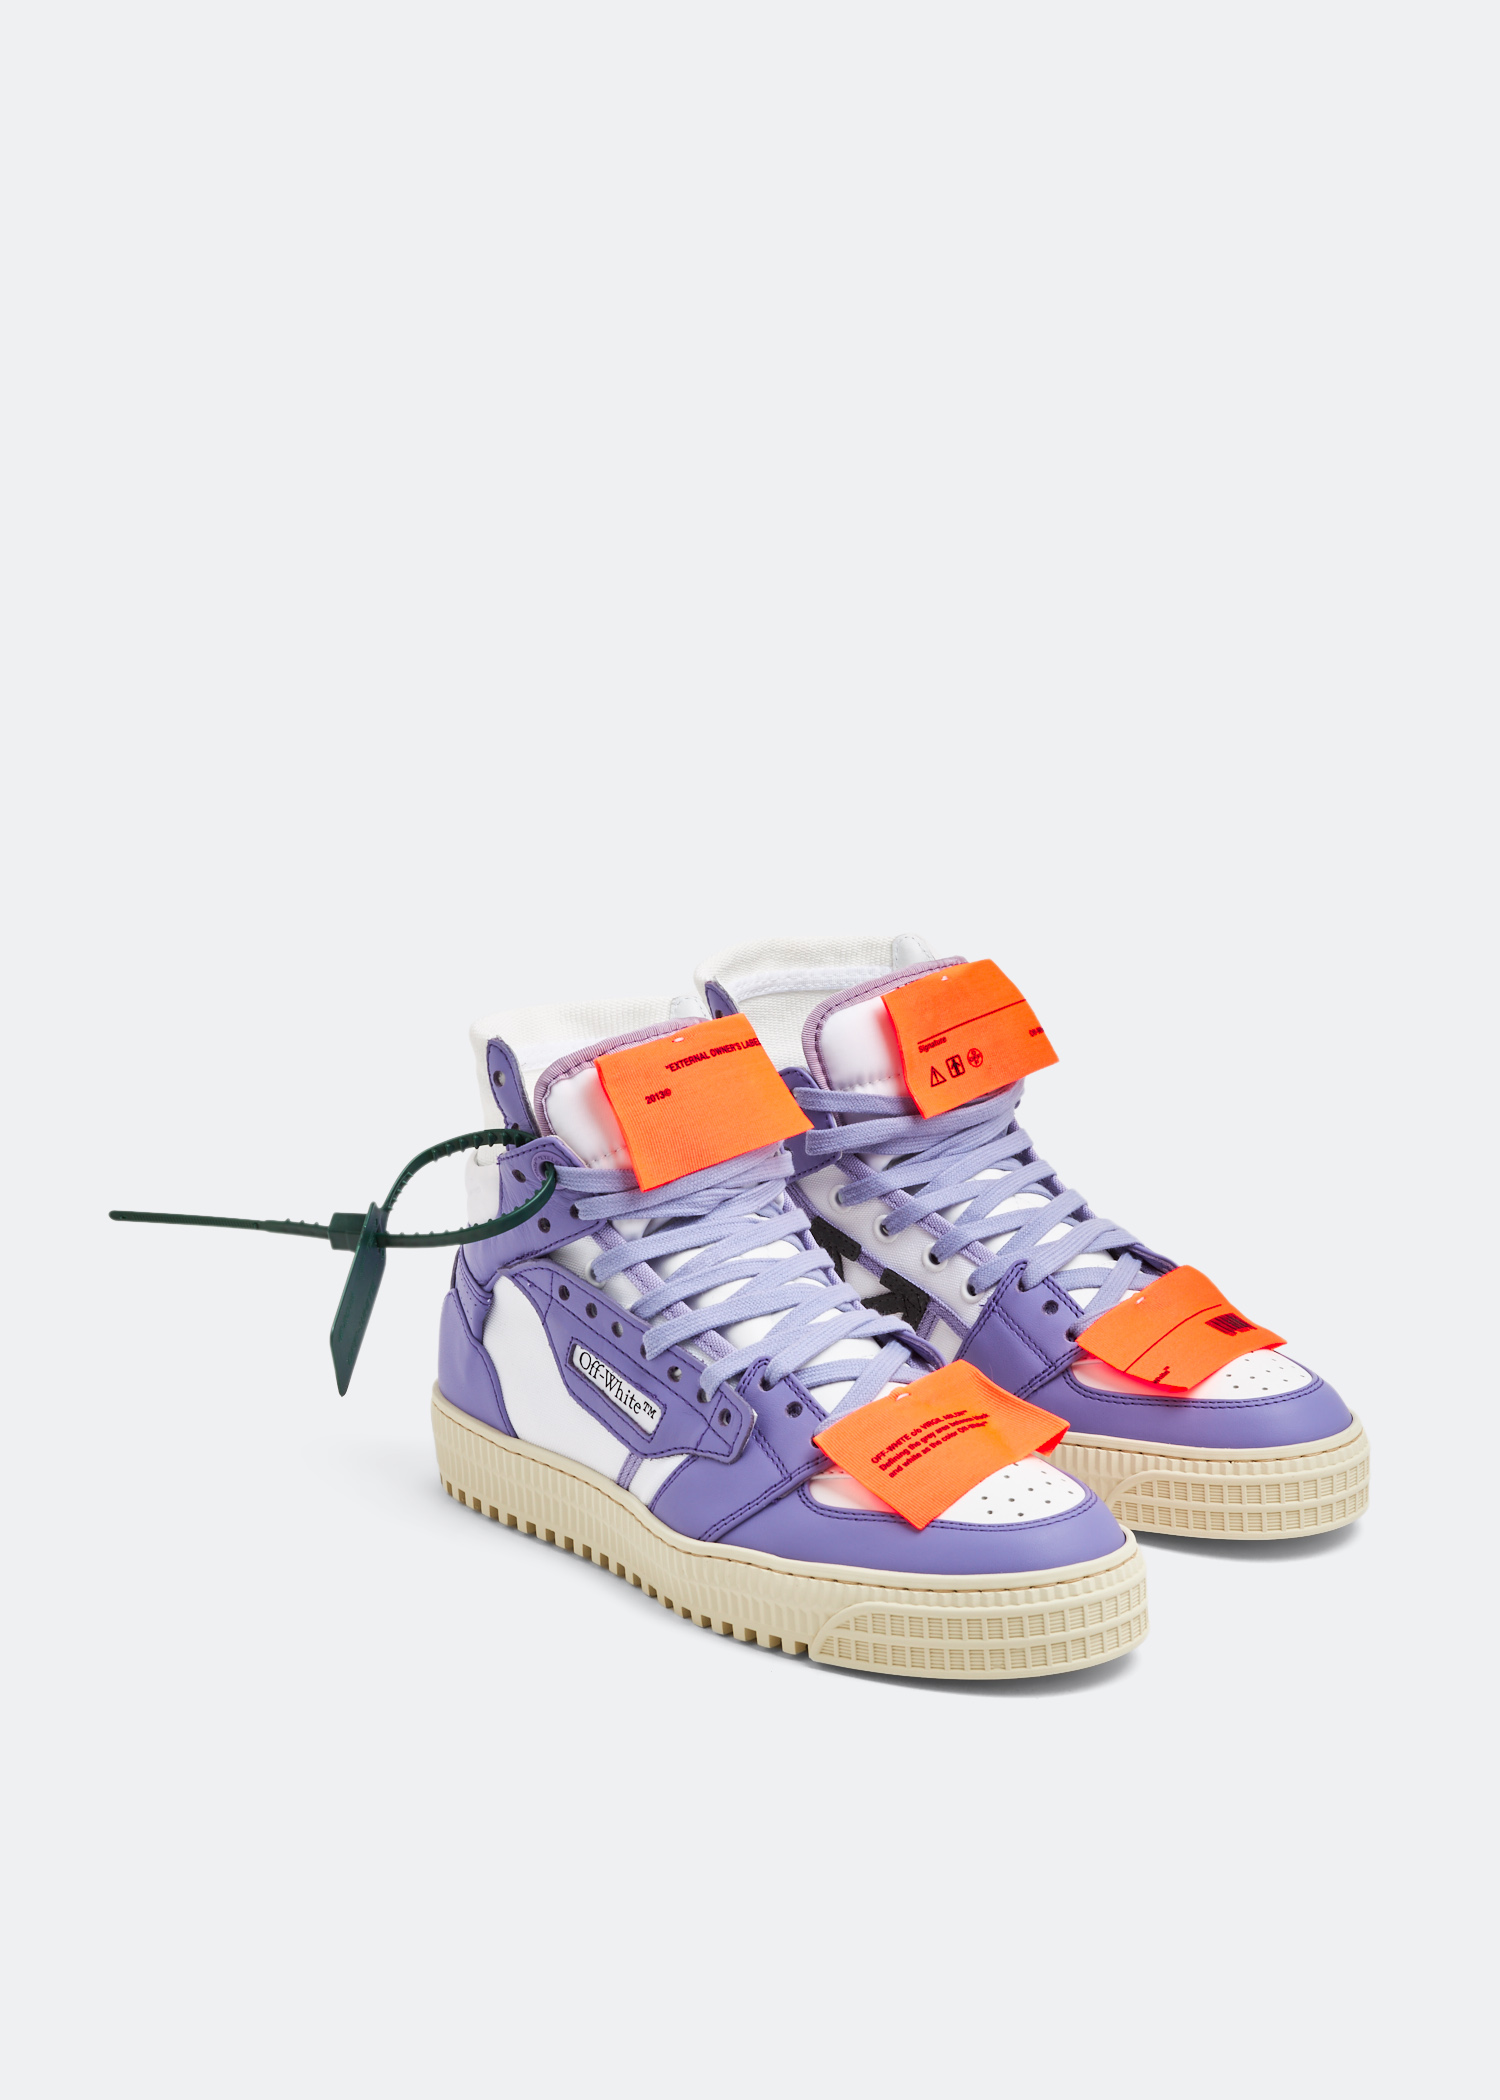 Off-White 3.0 Off-Court sneakers for Women - Purple in KSA | Level 